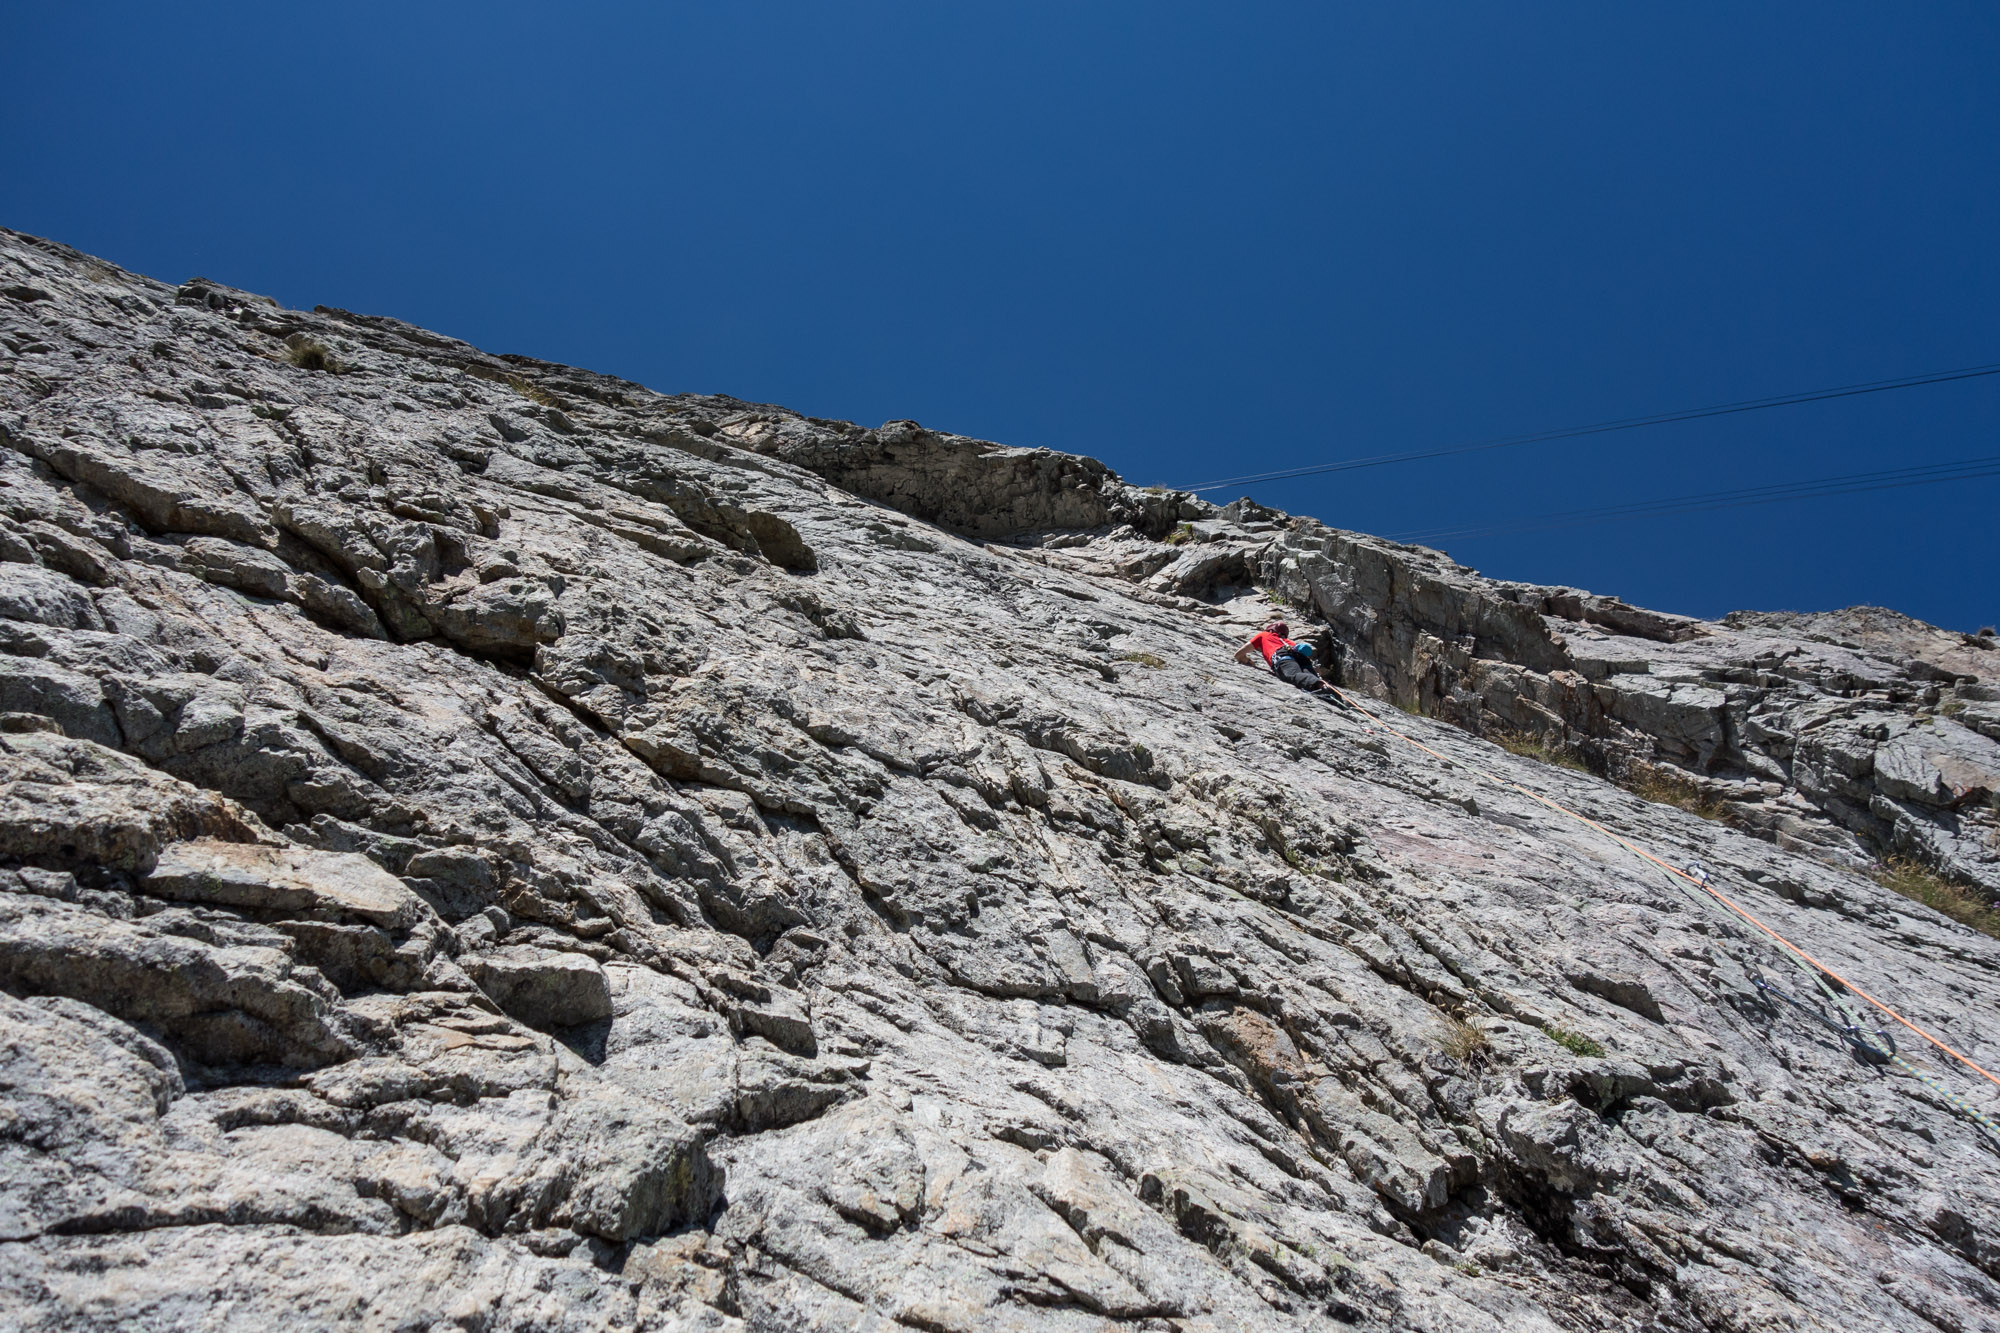 Mark sends the the "slab" pitch - a sustained technical wall on poor, tenuous holds